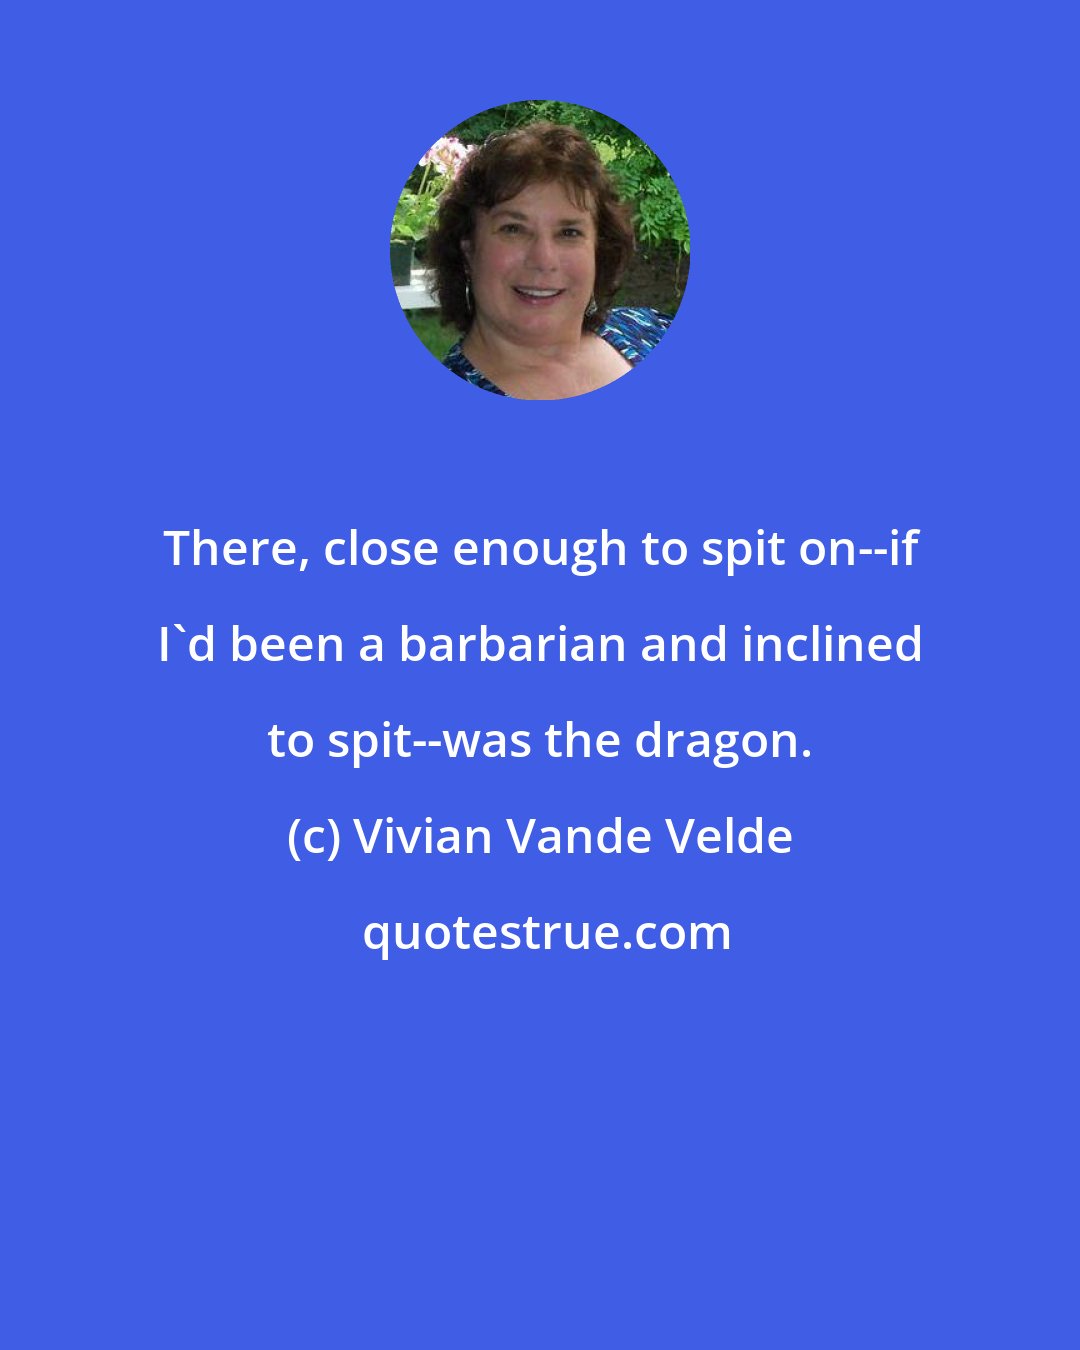 Vivian Vande Velde: There, close enough to spit on--if I'd been a barbarian and inclined to spit--was the dragon.